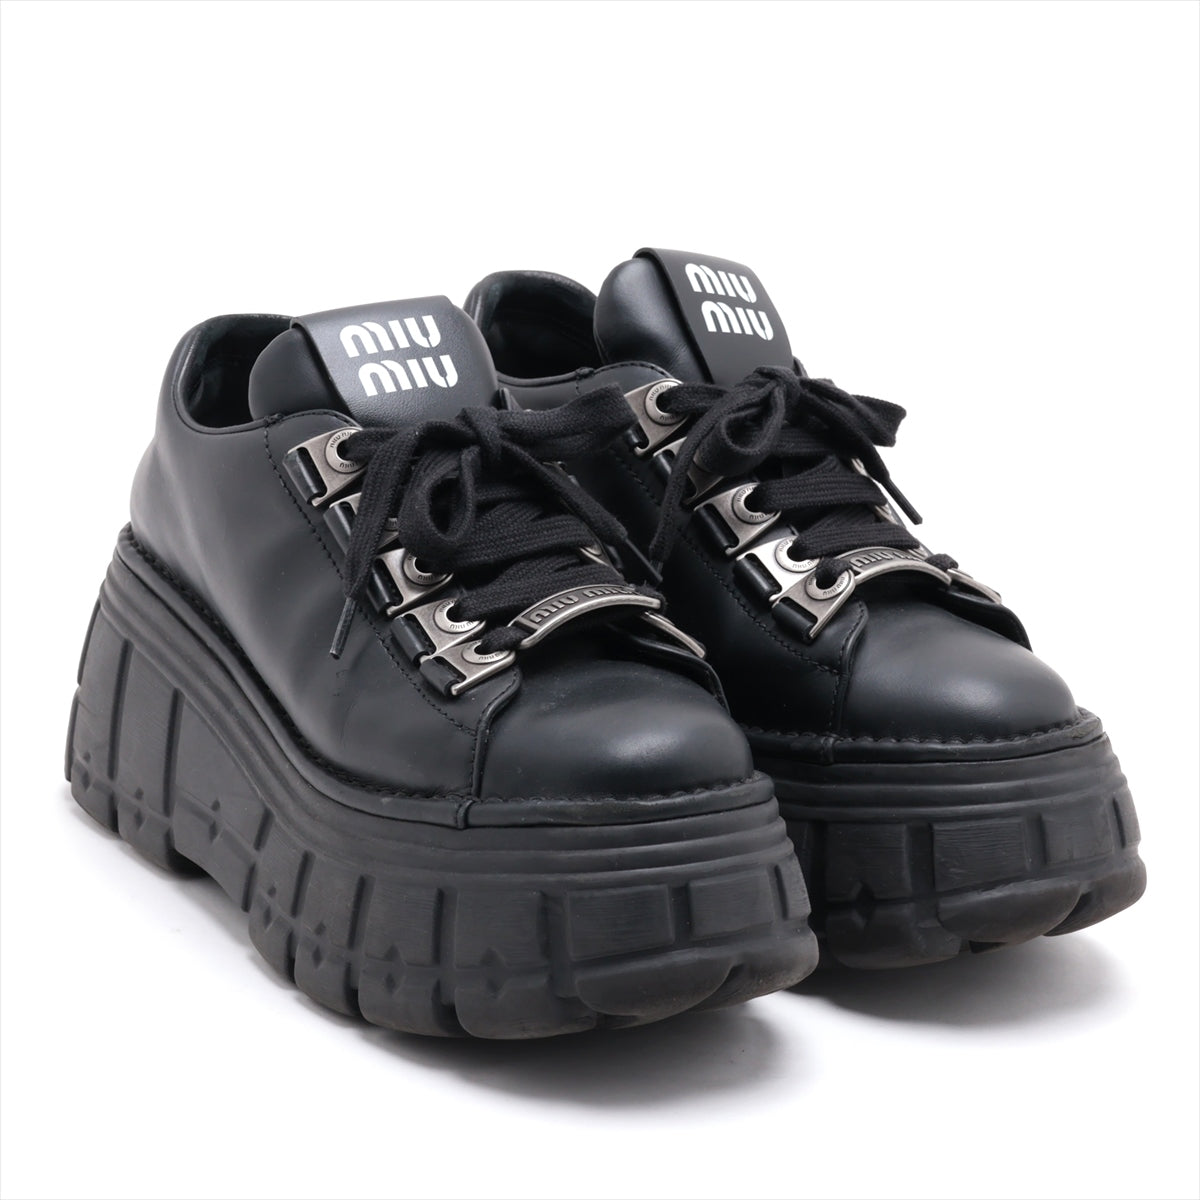 Miu Miu Leather Sneakers 37.5 Ladies' Black 679 Thick bottom lace-up derby